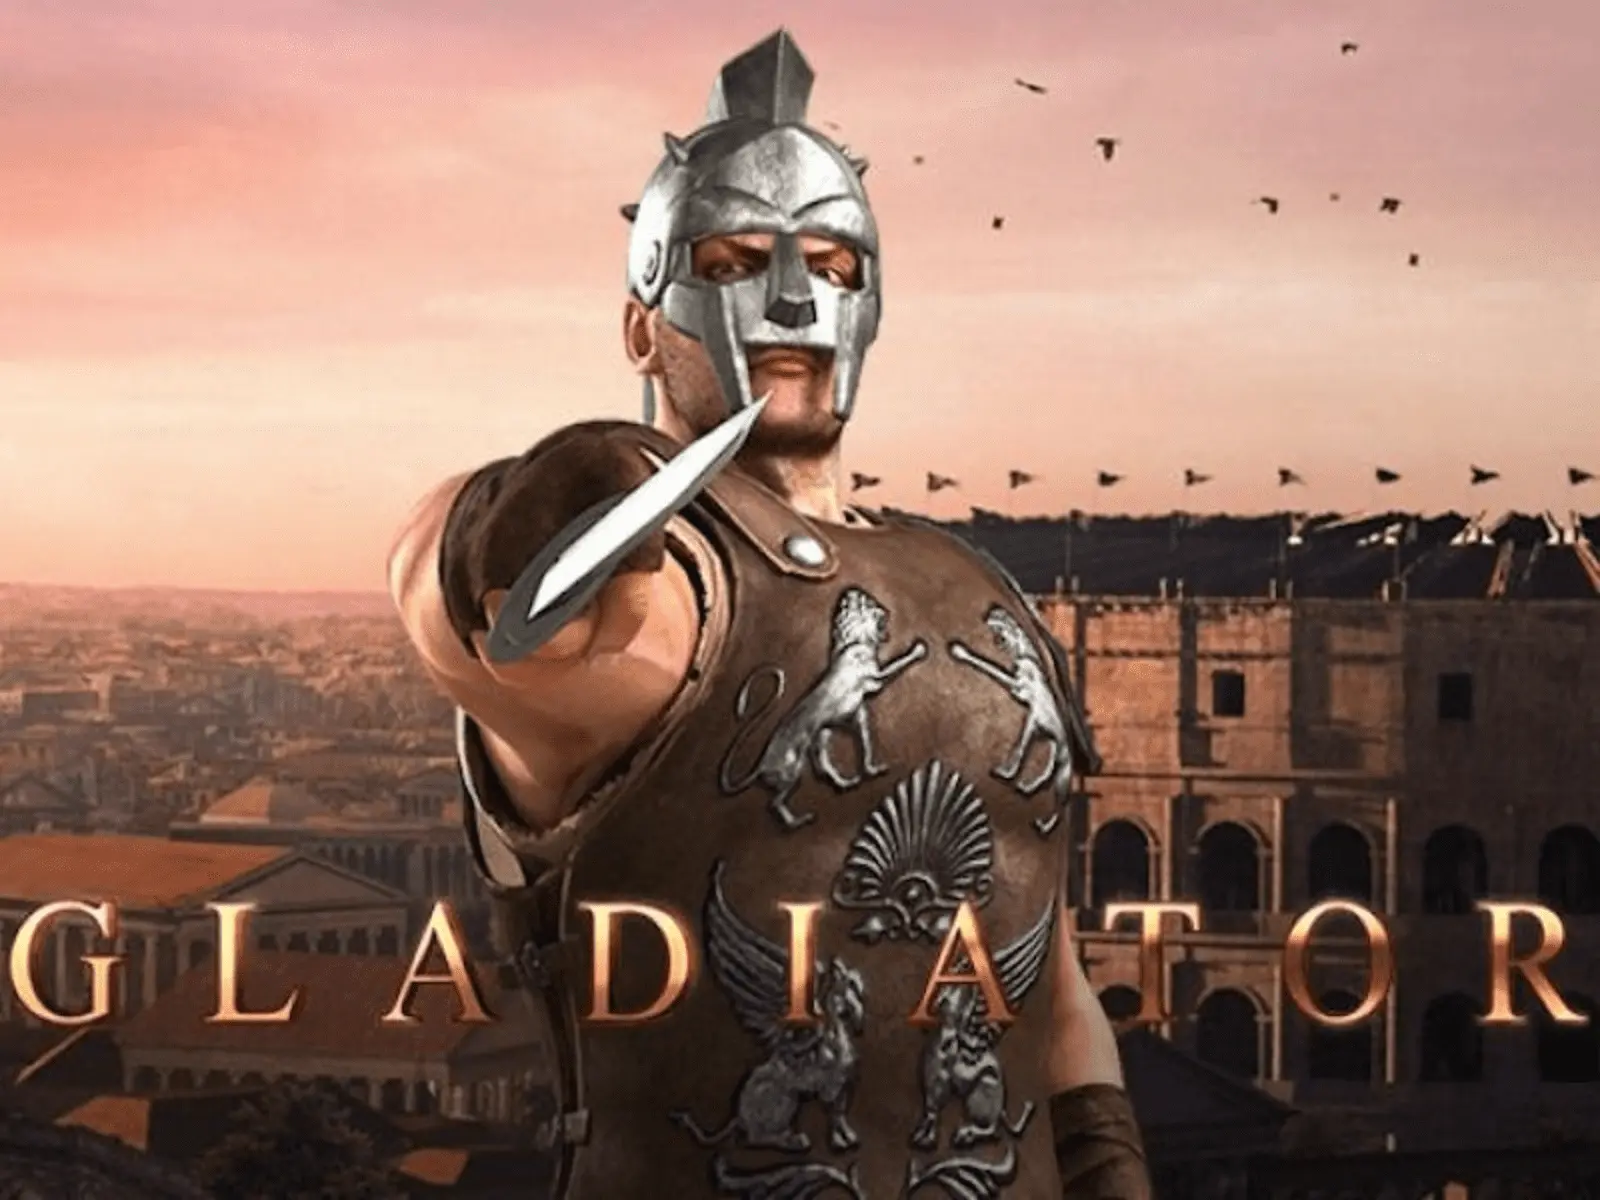 Gladiator online slot game for Canadian players